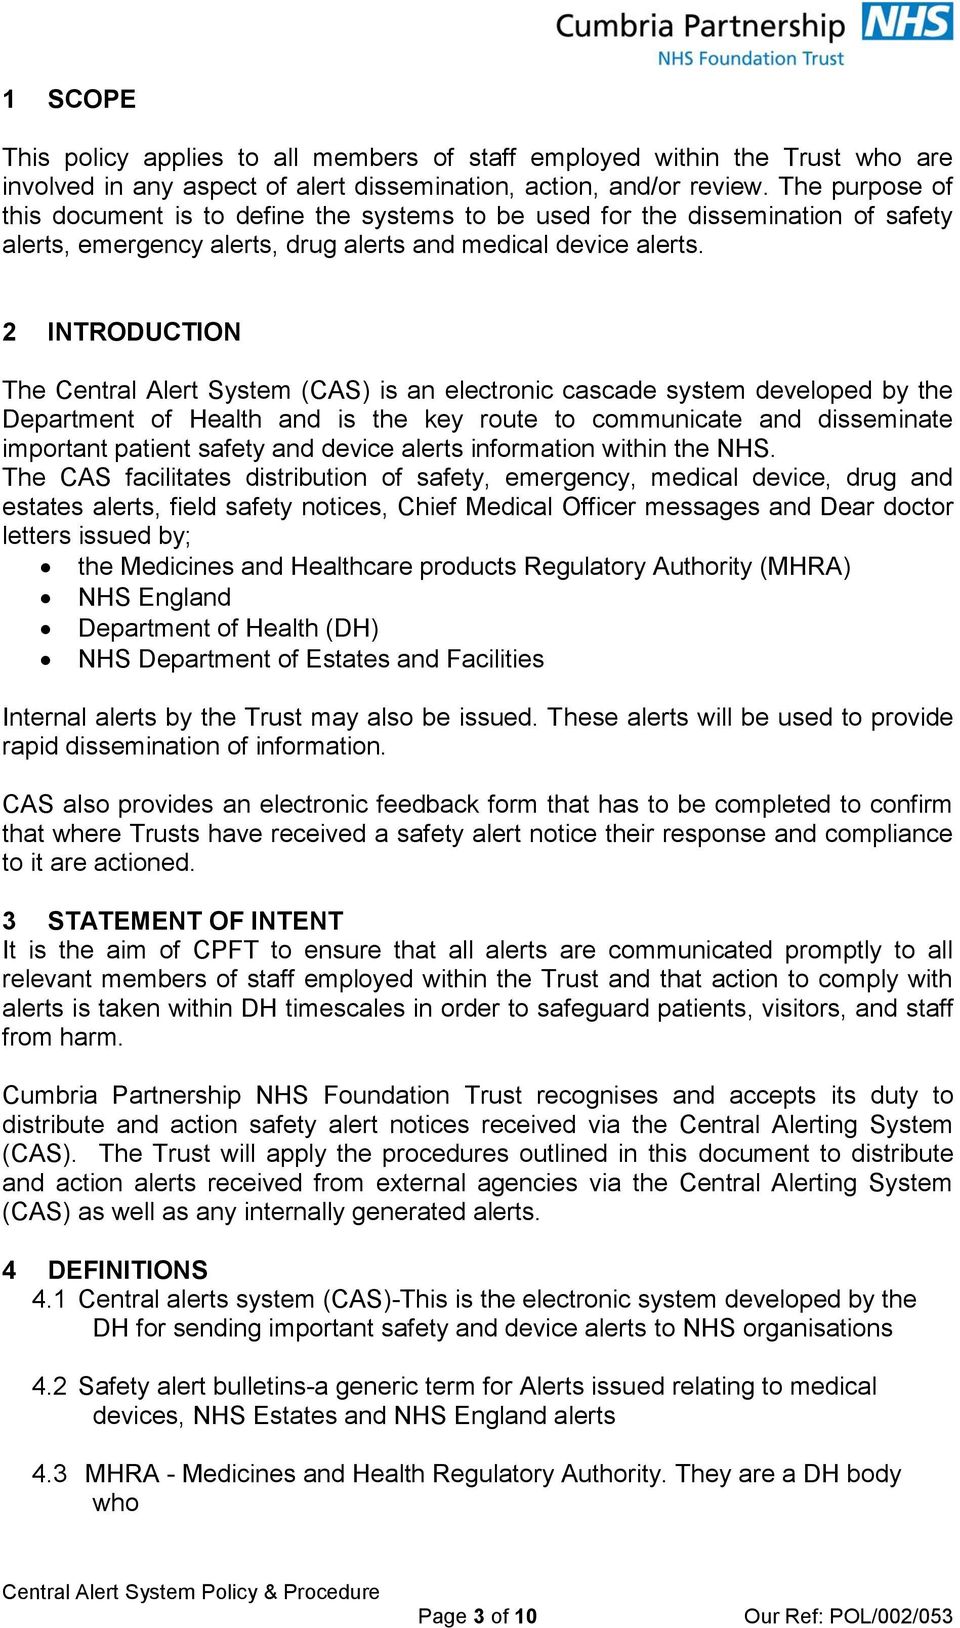 2 INTRODUCTION The Central Alert System (CAS) is an electronic cascade system developed by the Department of Health and is the key route to communicate and disseminate important patient safety and